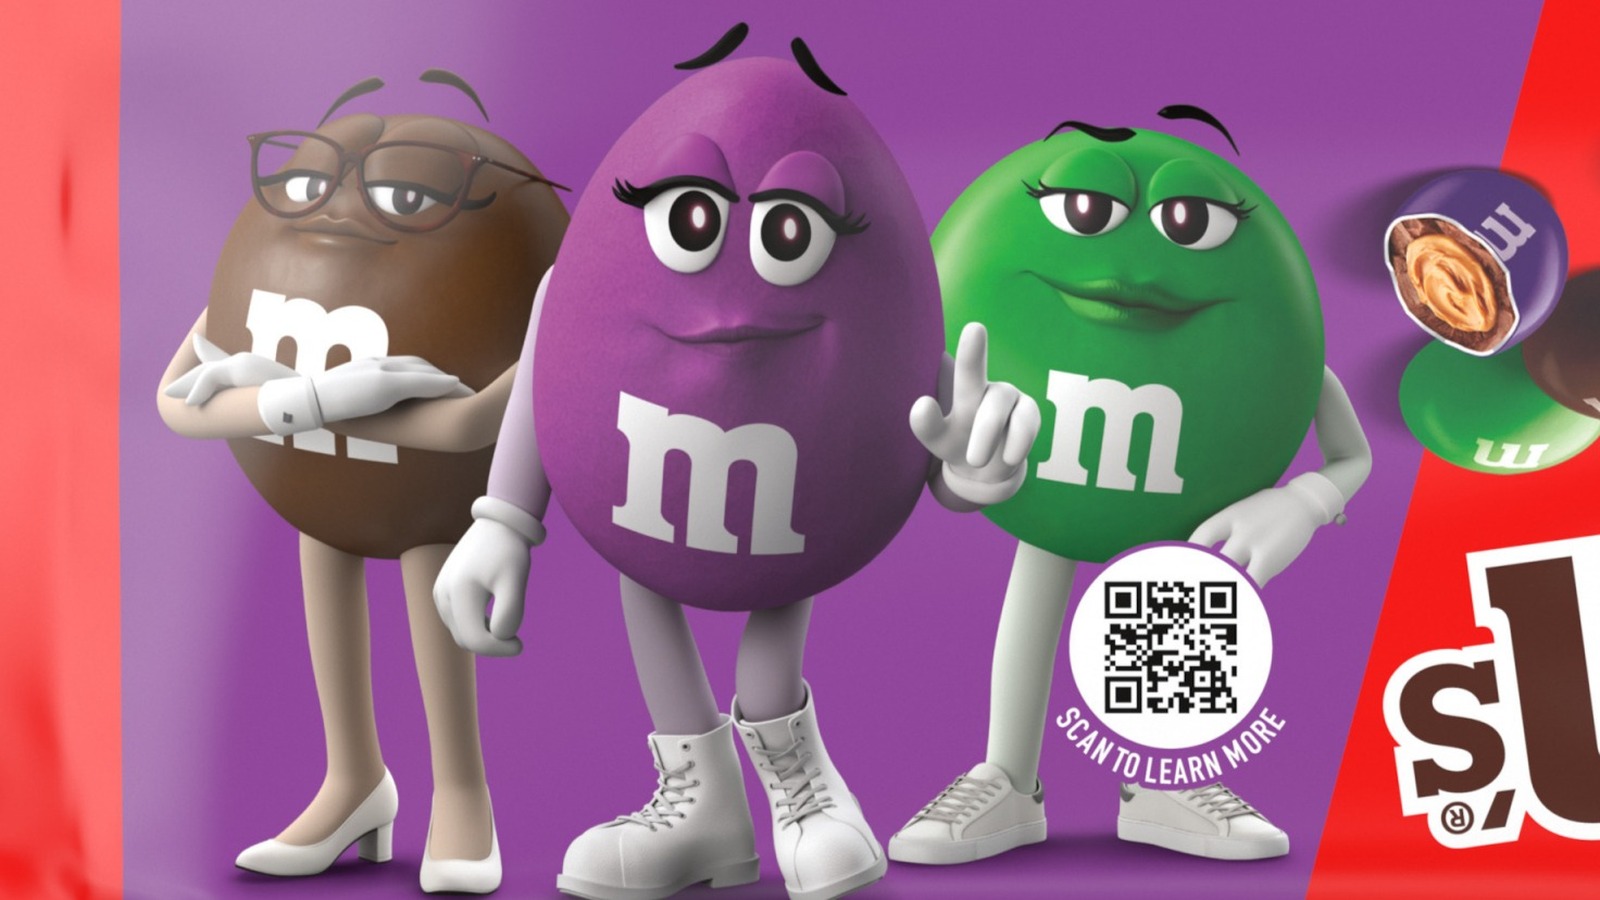 Purple makes her debut on newest M&M's permanent flavor coming out next  year 